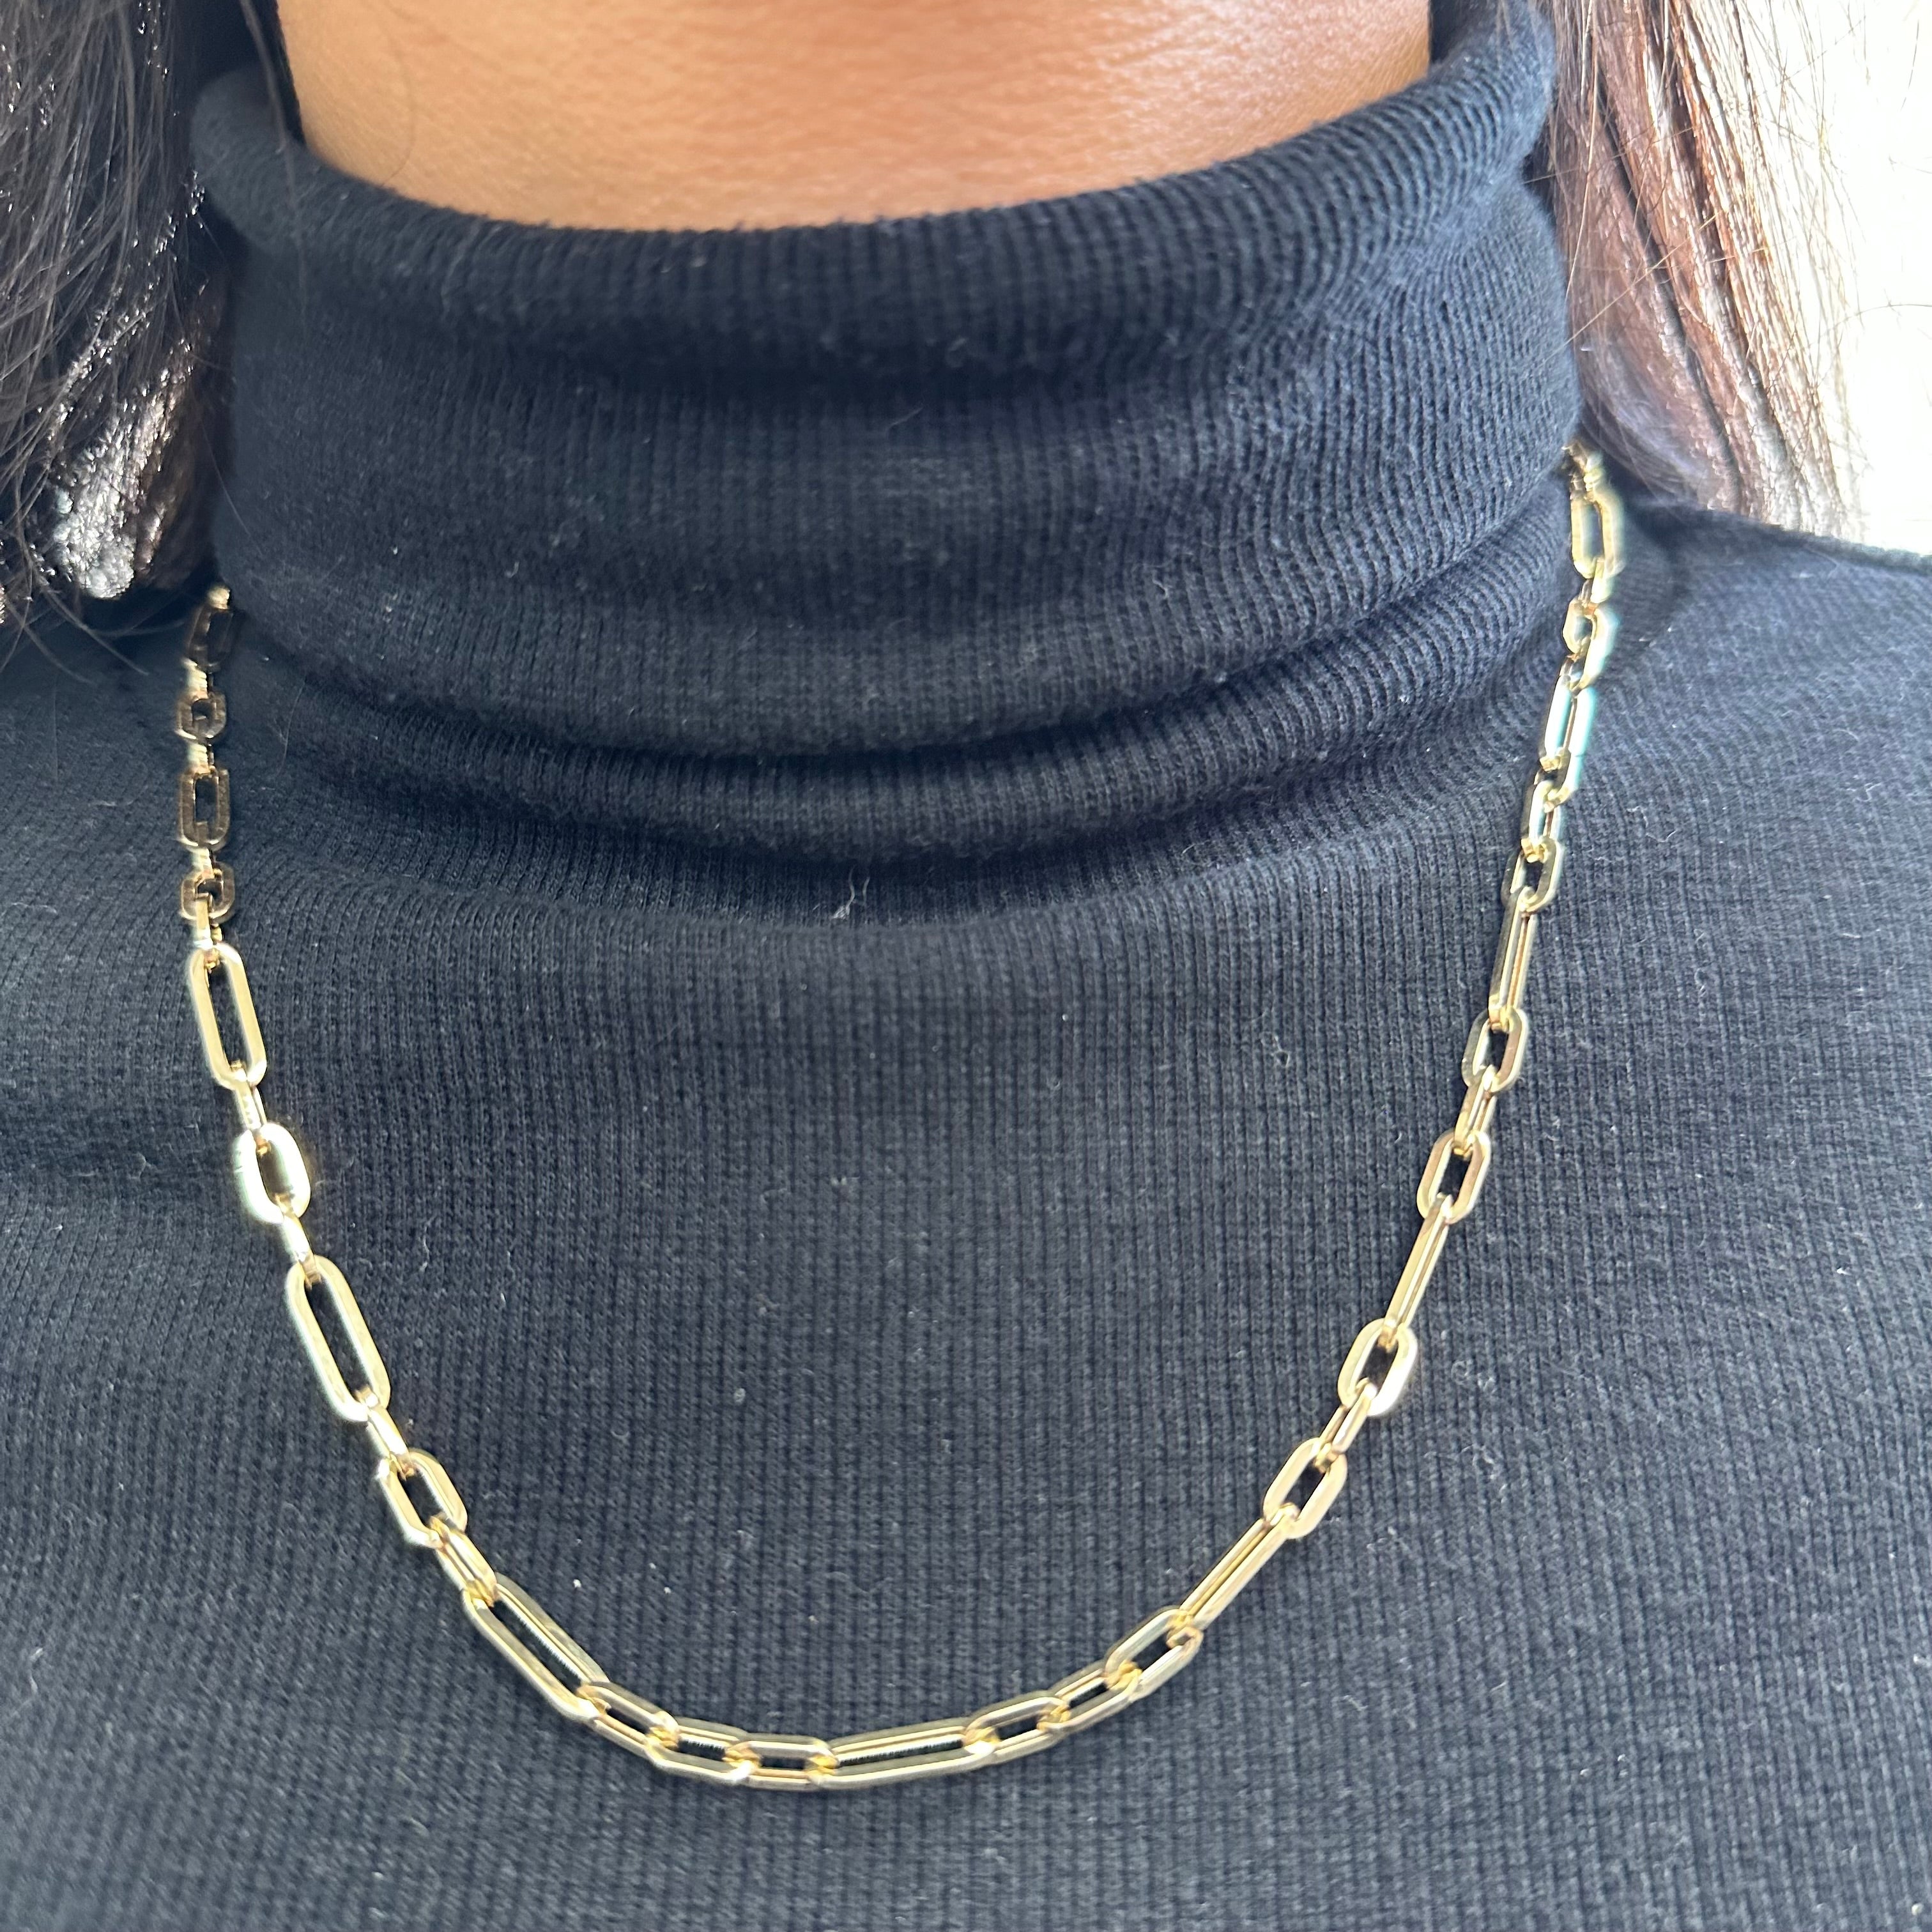 14K 3.99mm Yellow Gold Paper Clip Mix Chain 20"